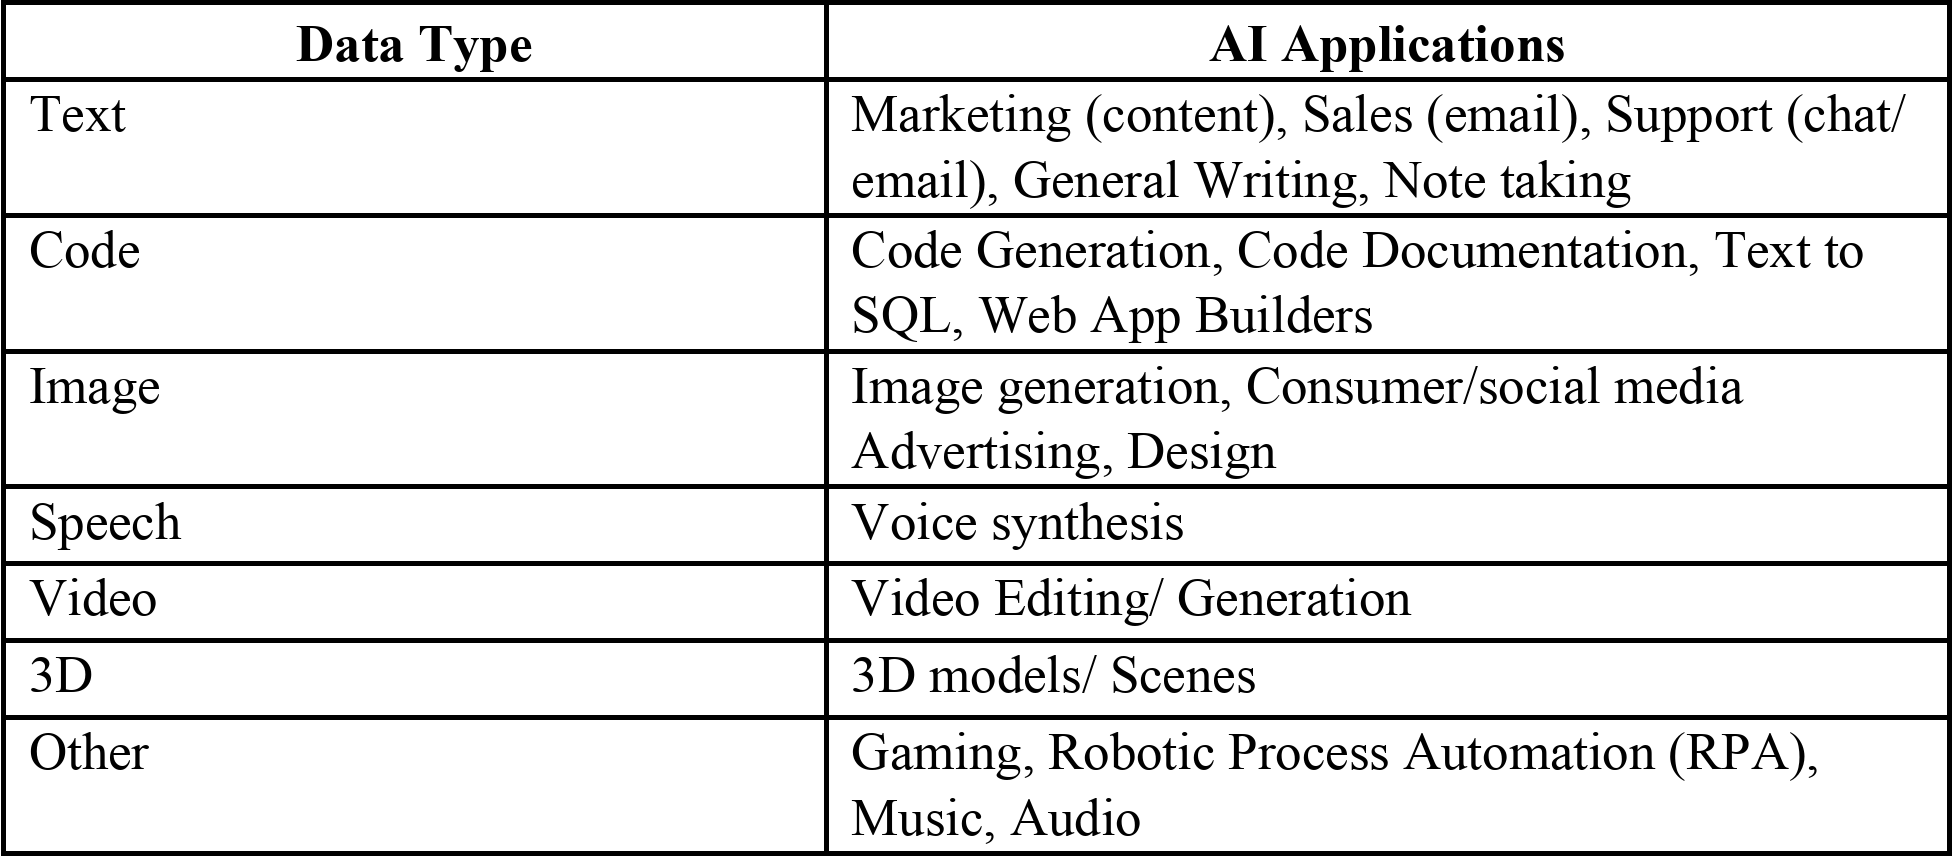 AI Application Opportunities